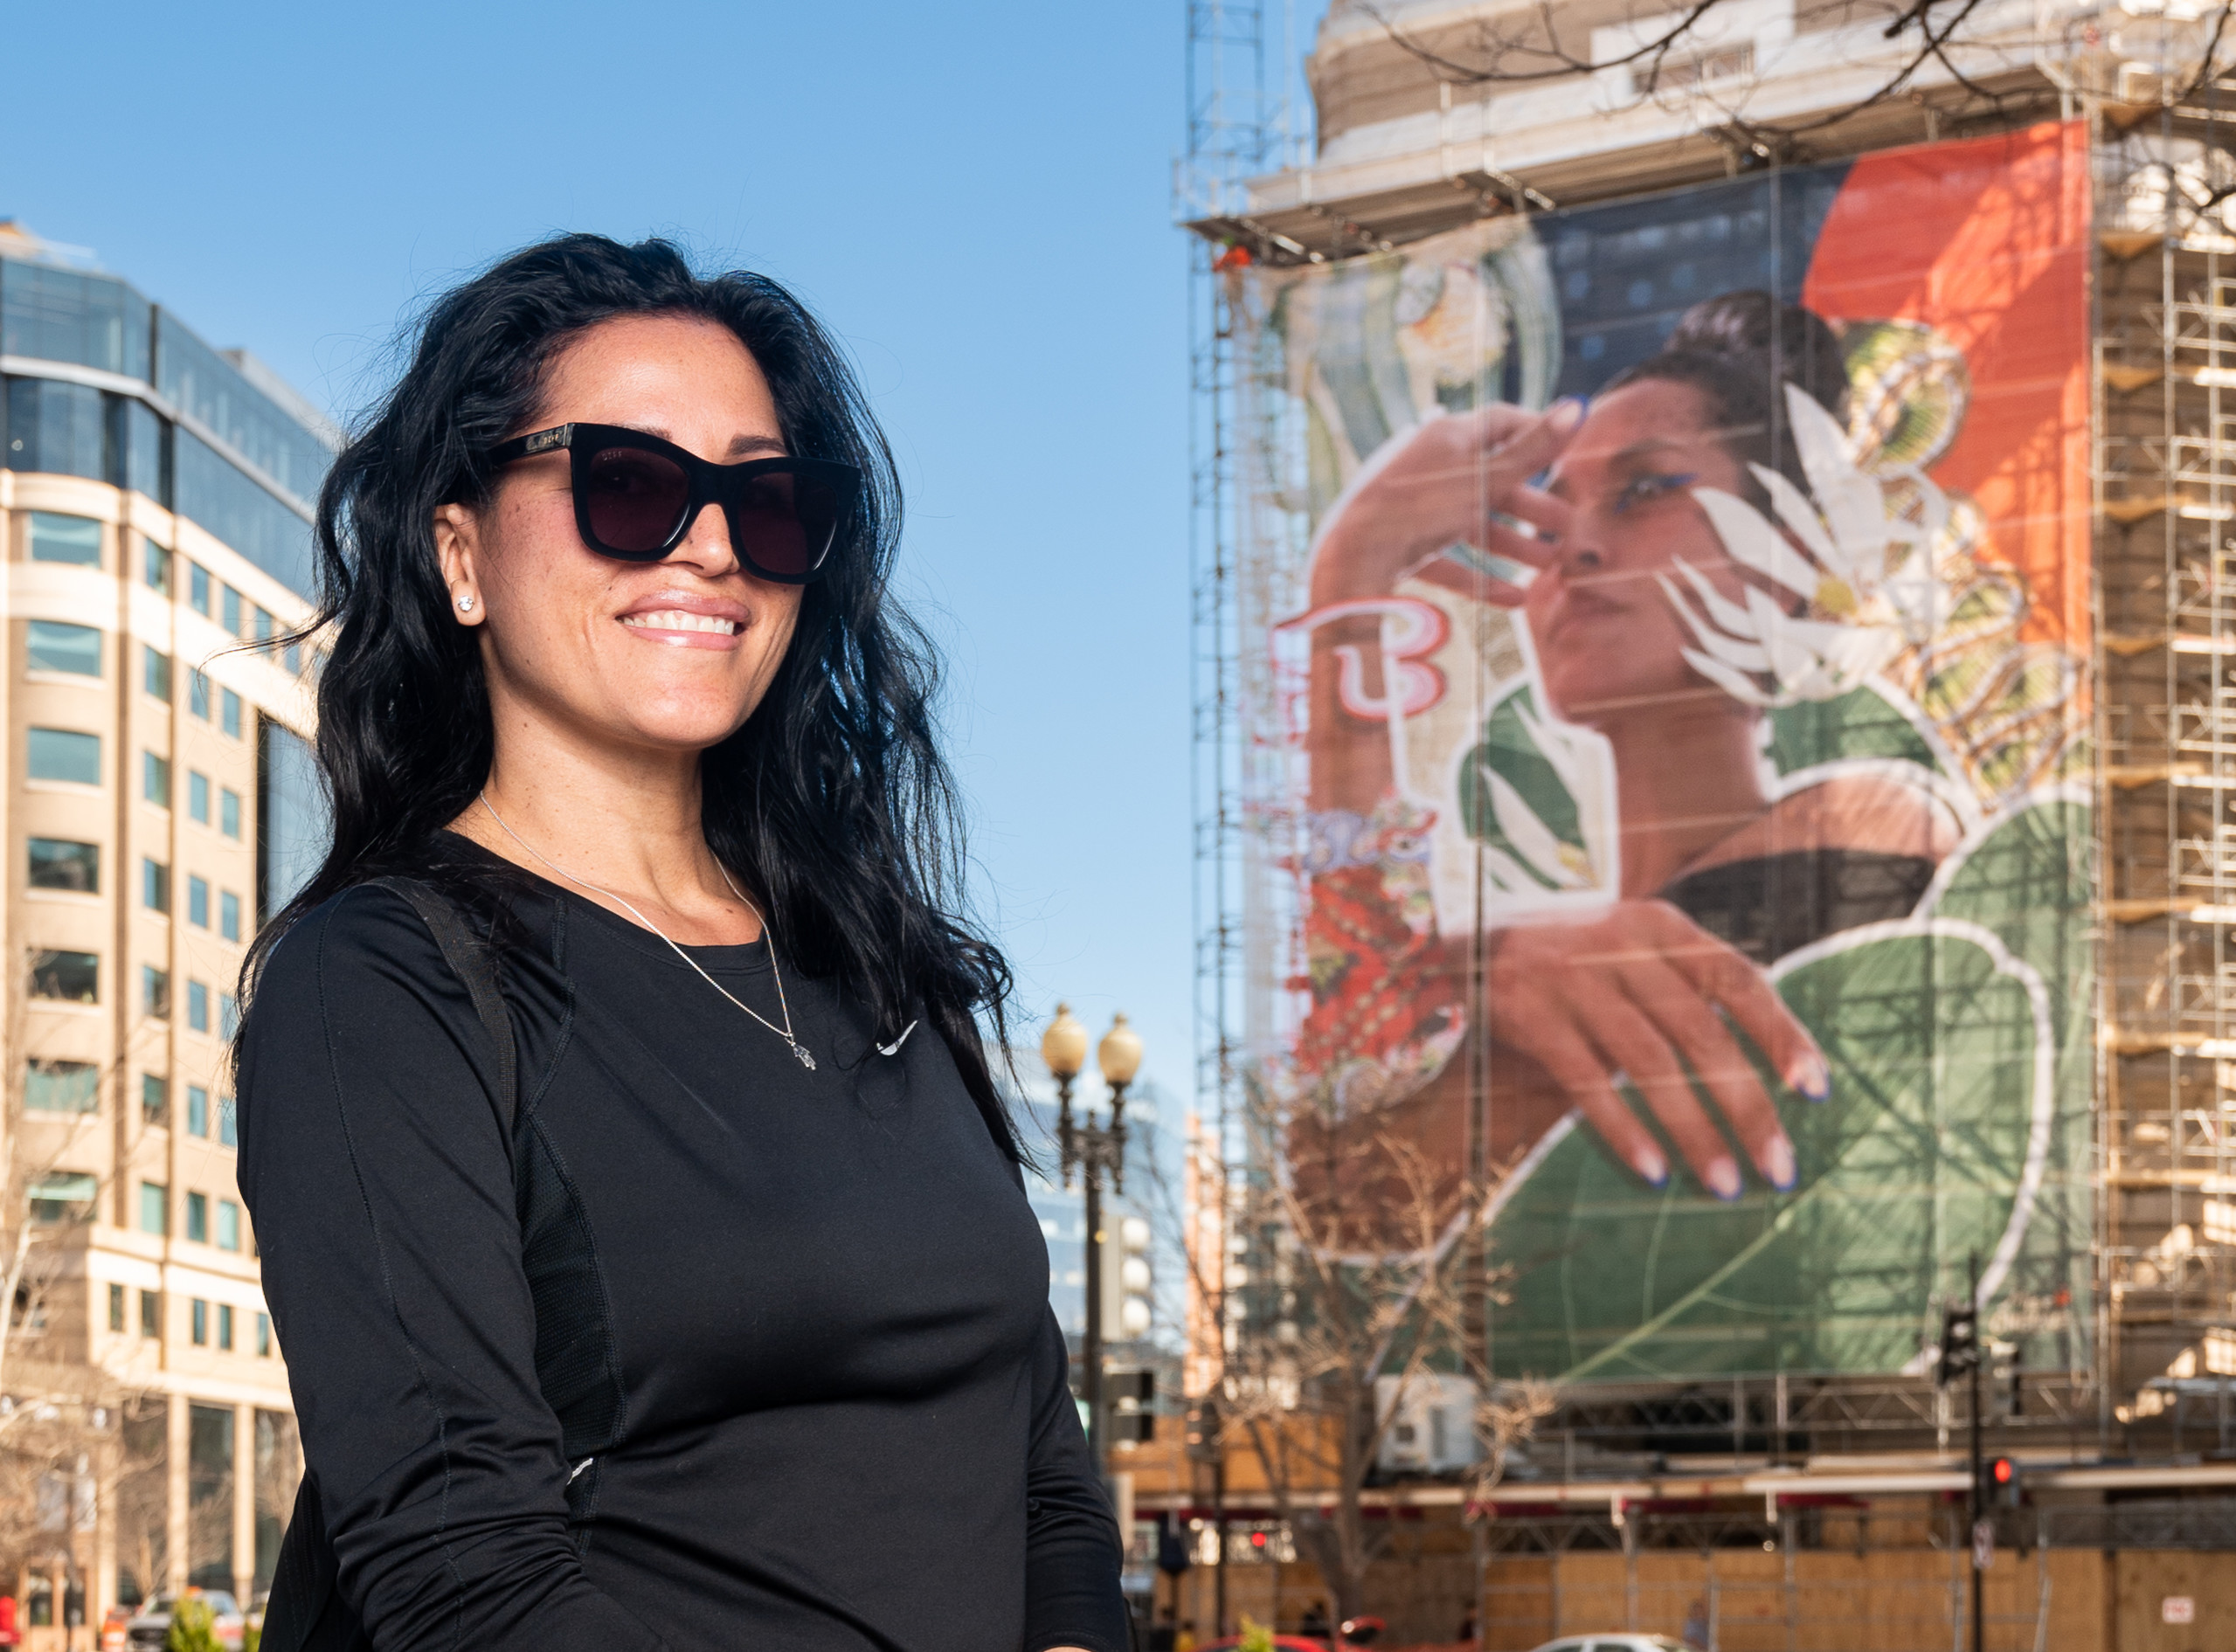 A woman with medium skin tone with long dark hard, sunglasses, and a black shirt stands in front of the exterior of the museum and the large, colorful mural on the front.